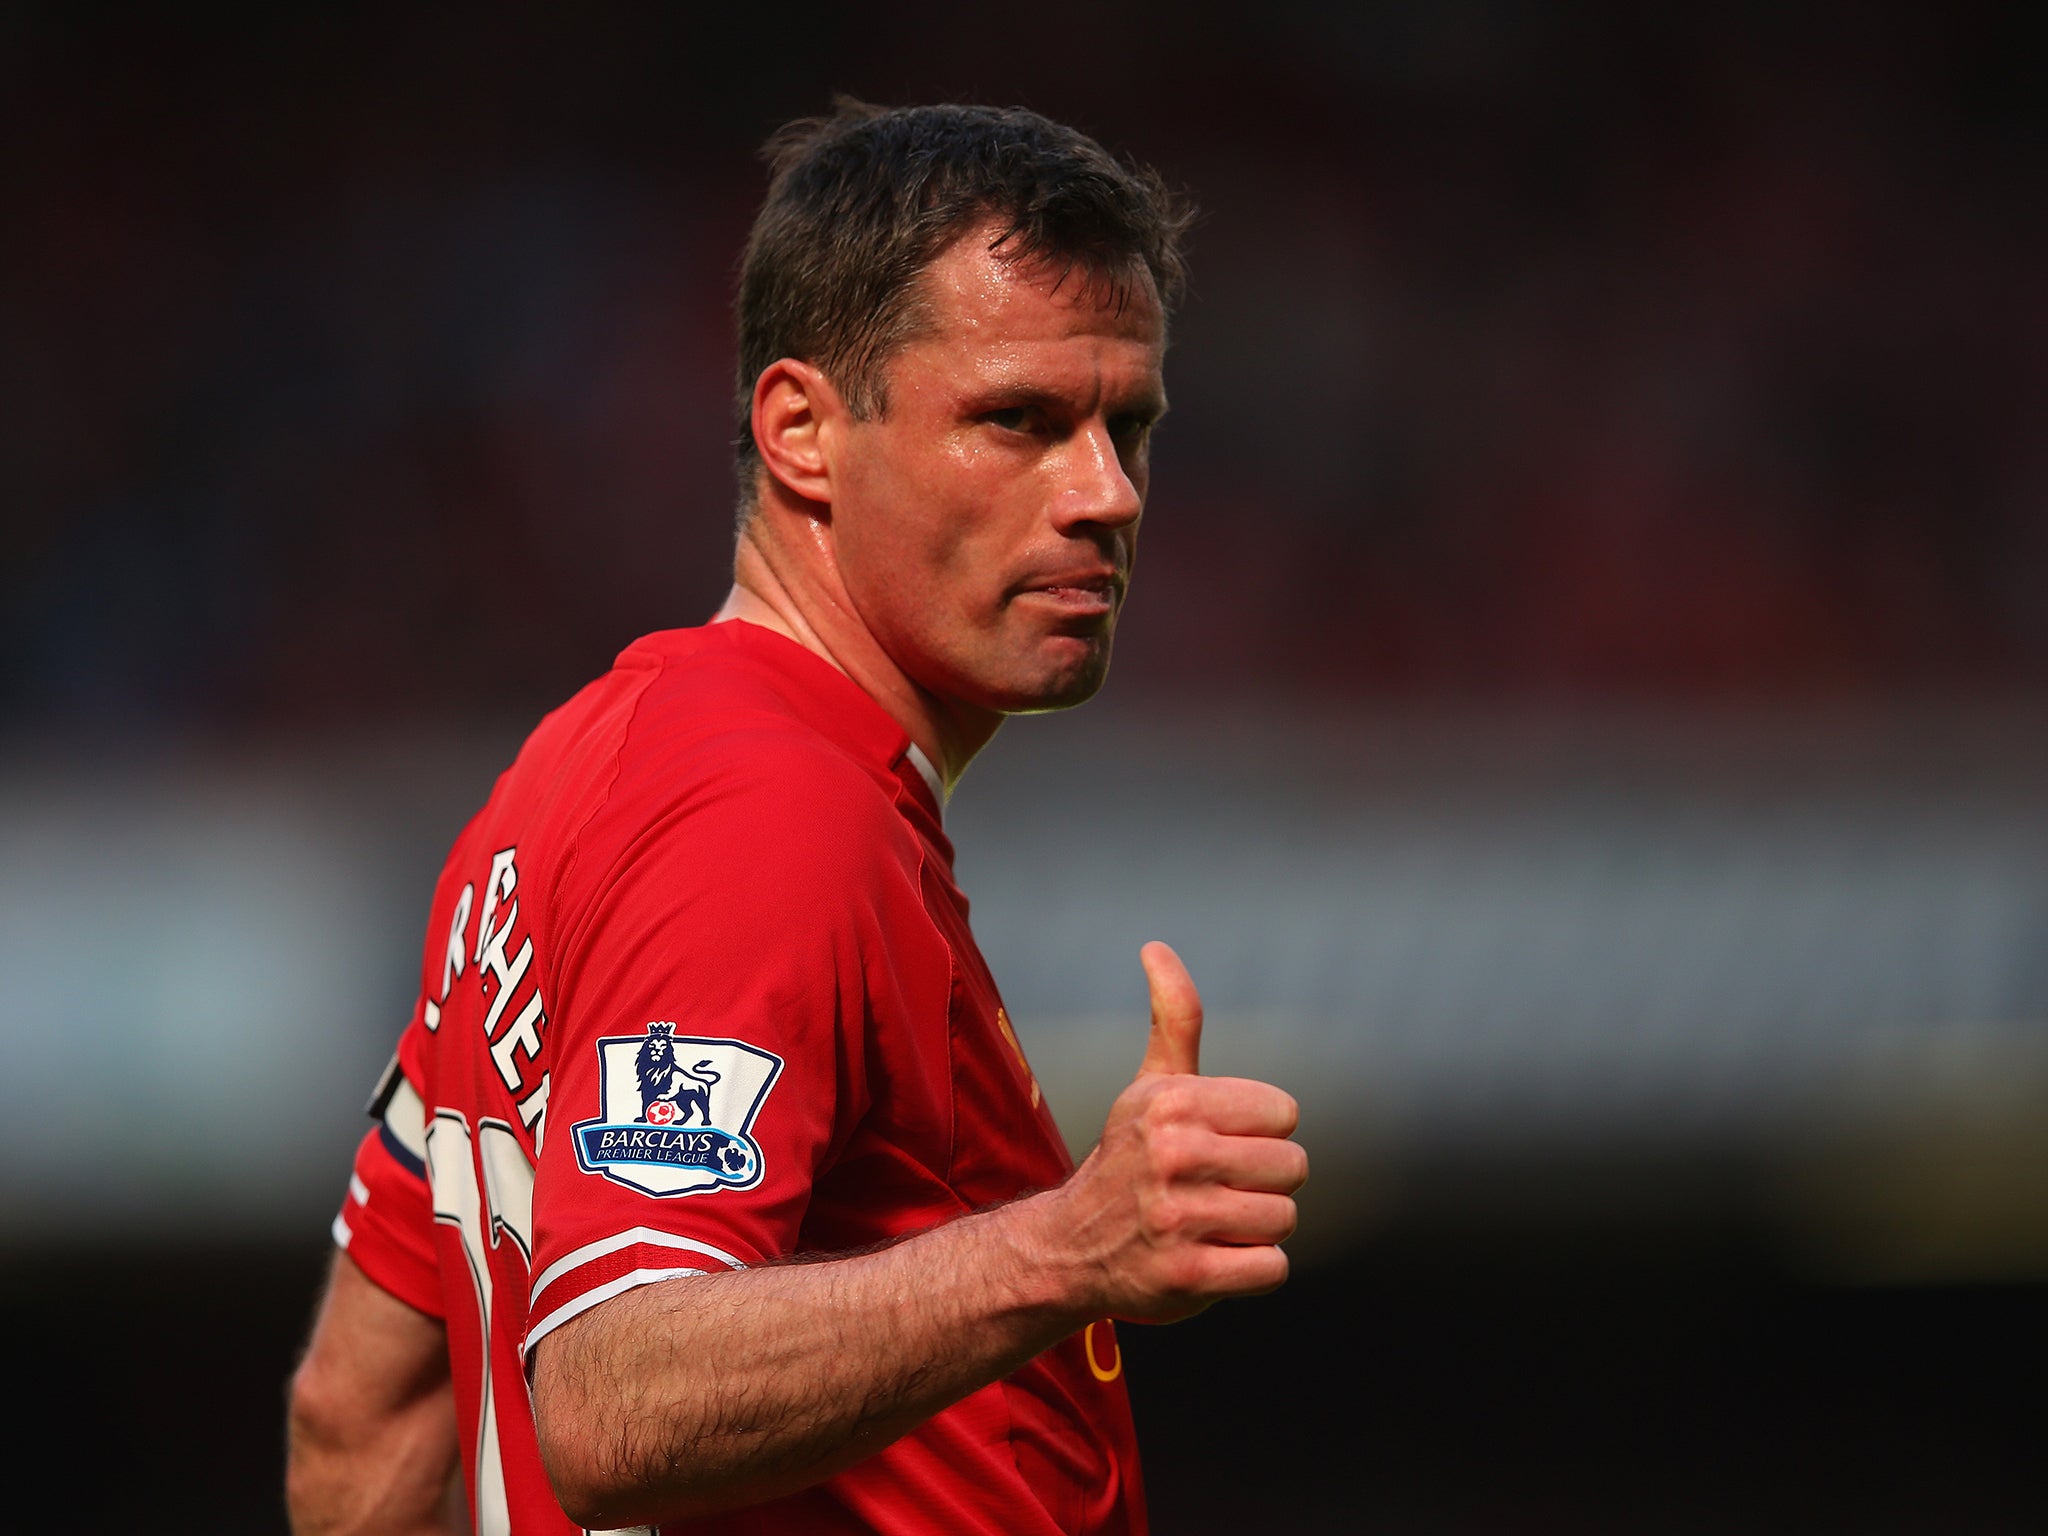 Carragher praised the effect of Liverpool's new manager